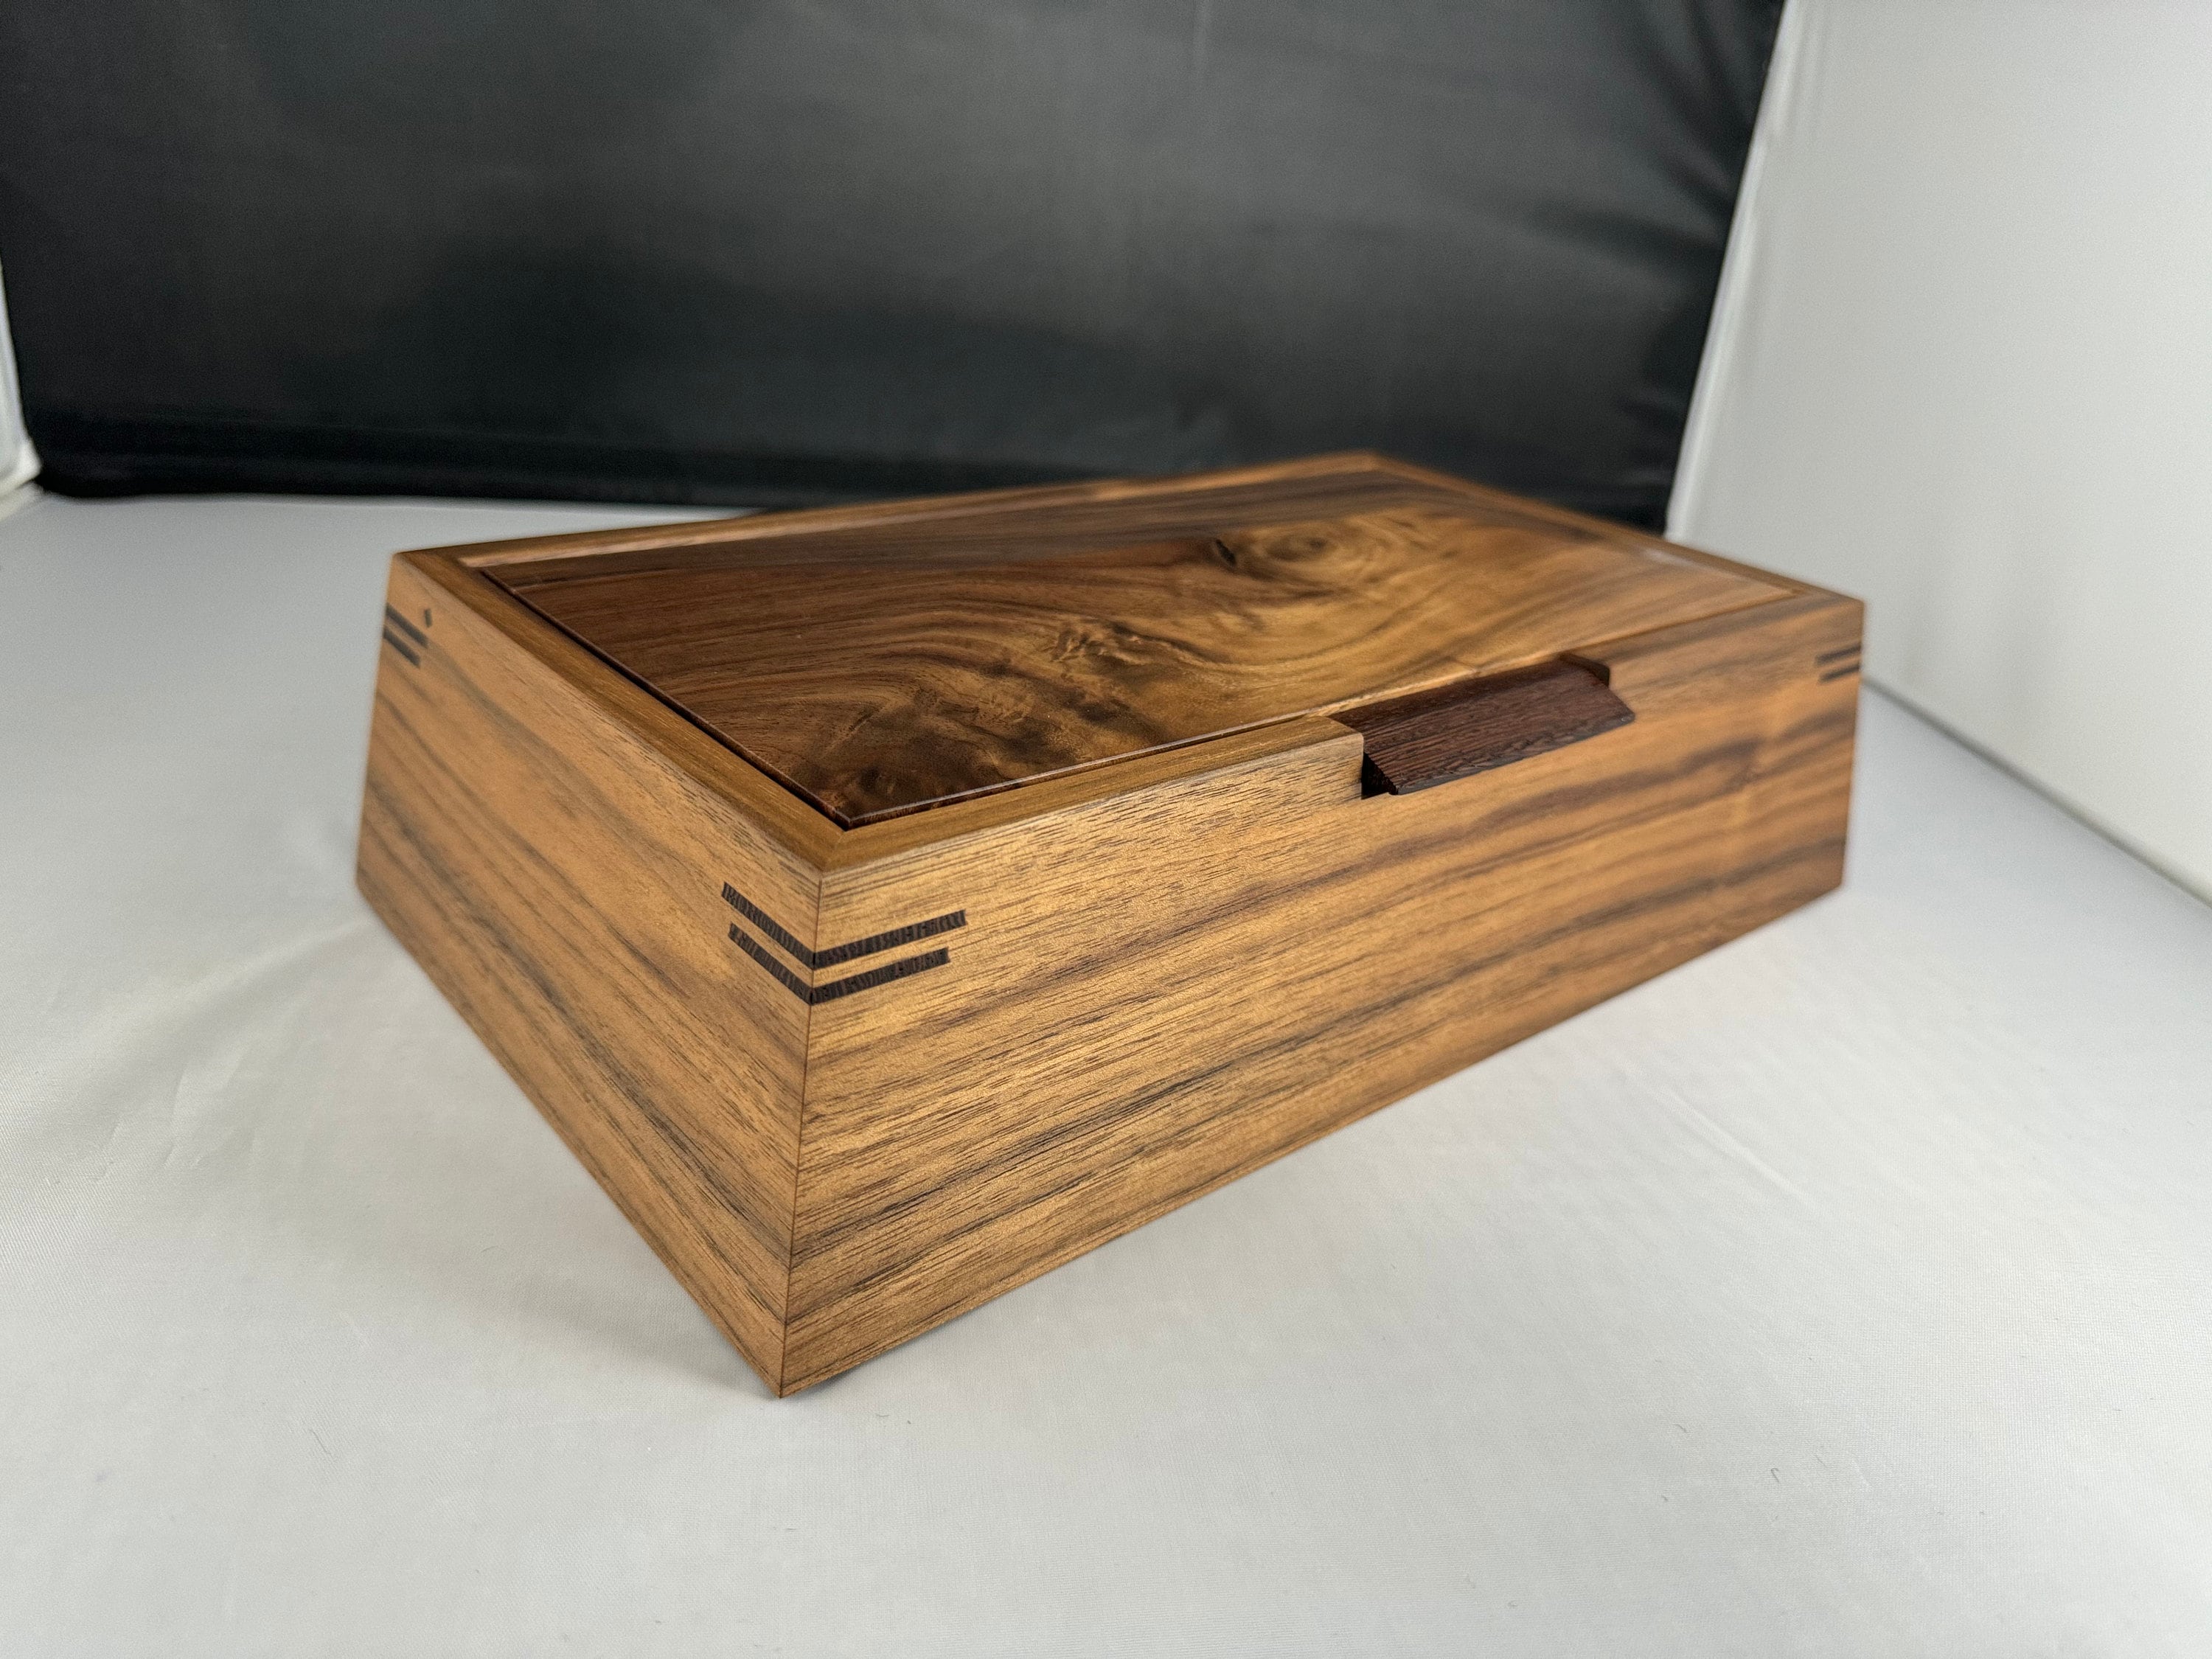 Tie Storage Box - Personalized Groom Gifts from The Bride, Premium Quality Custom Wedding Gift, Solid Wood Box with Lid, 8 Ties Organizer